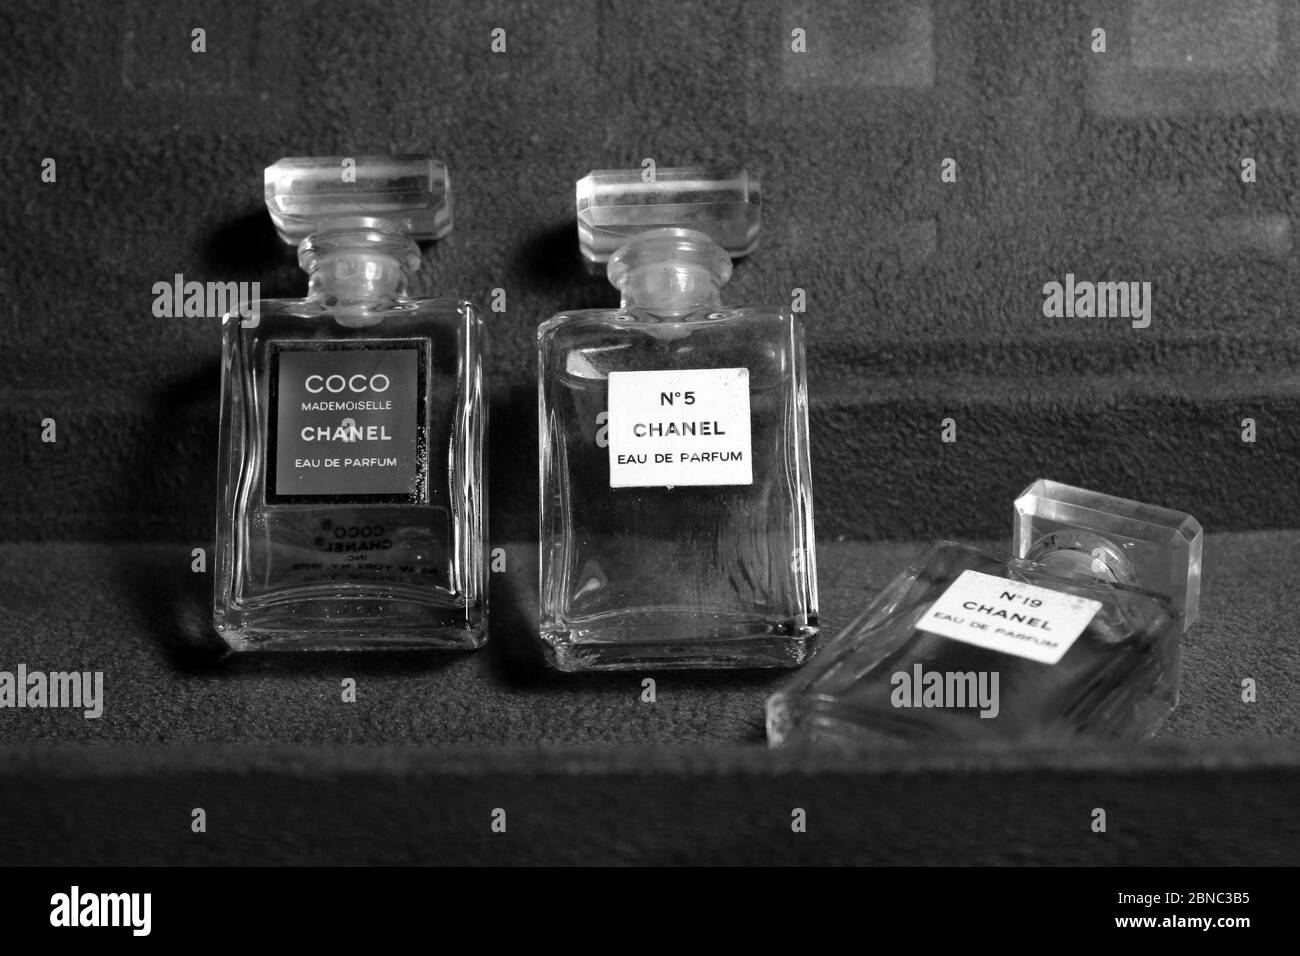 Paris, France on 13th May in 2020 : Chanel perfume bottles